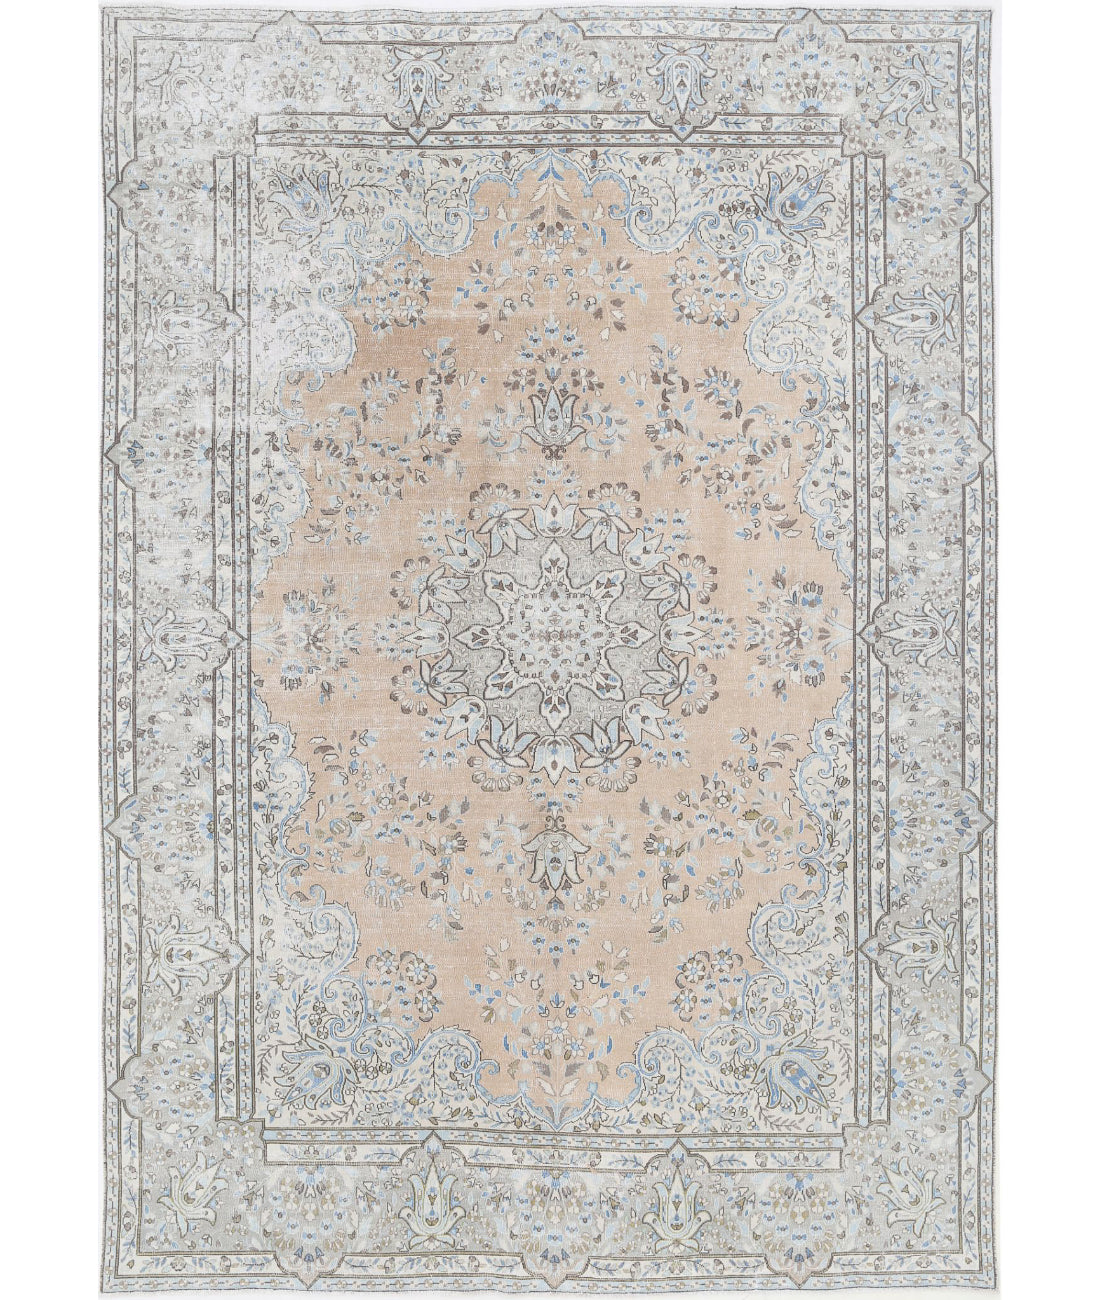 Hand Knotted Vintage Persian Kerman Wool Rug - 8'2'' x 11'7'' 8'2'' x 11'7'' (245 X 348) / Taupe / Grey